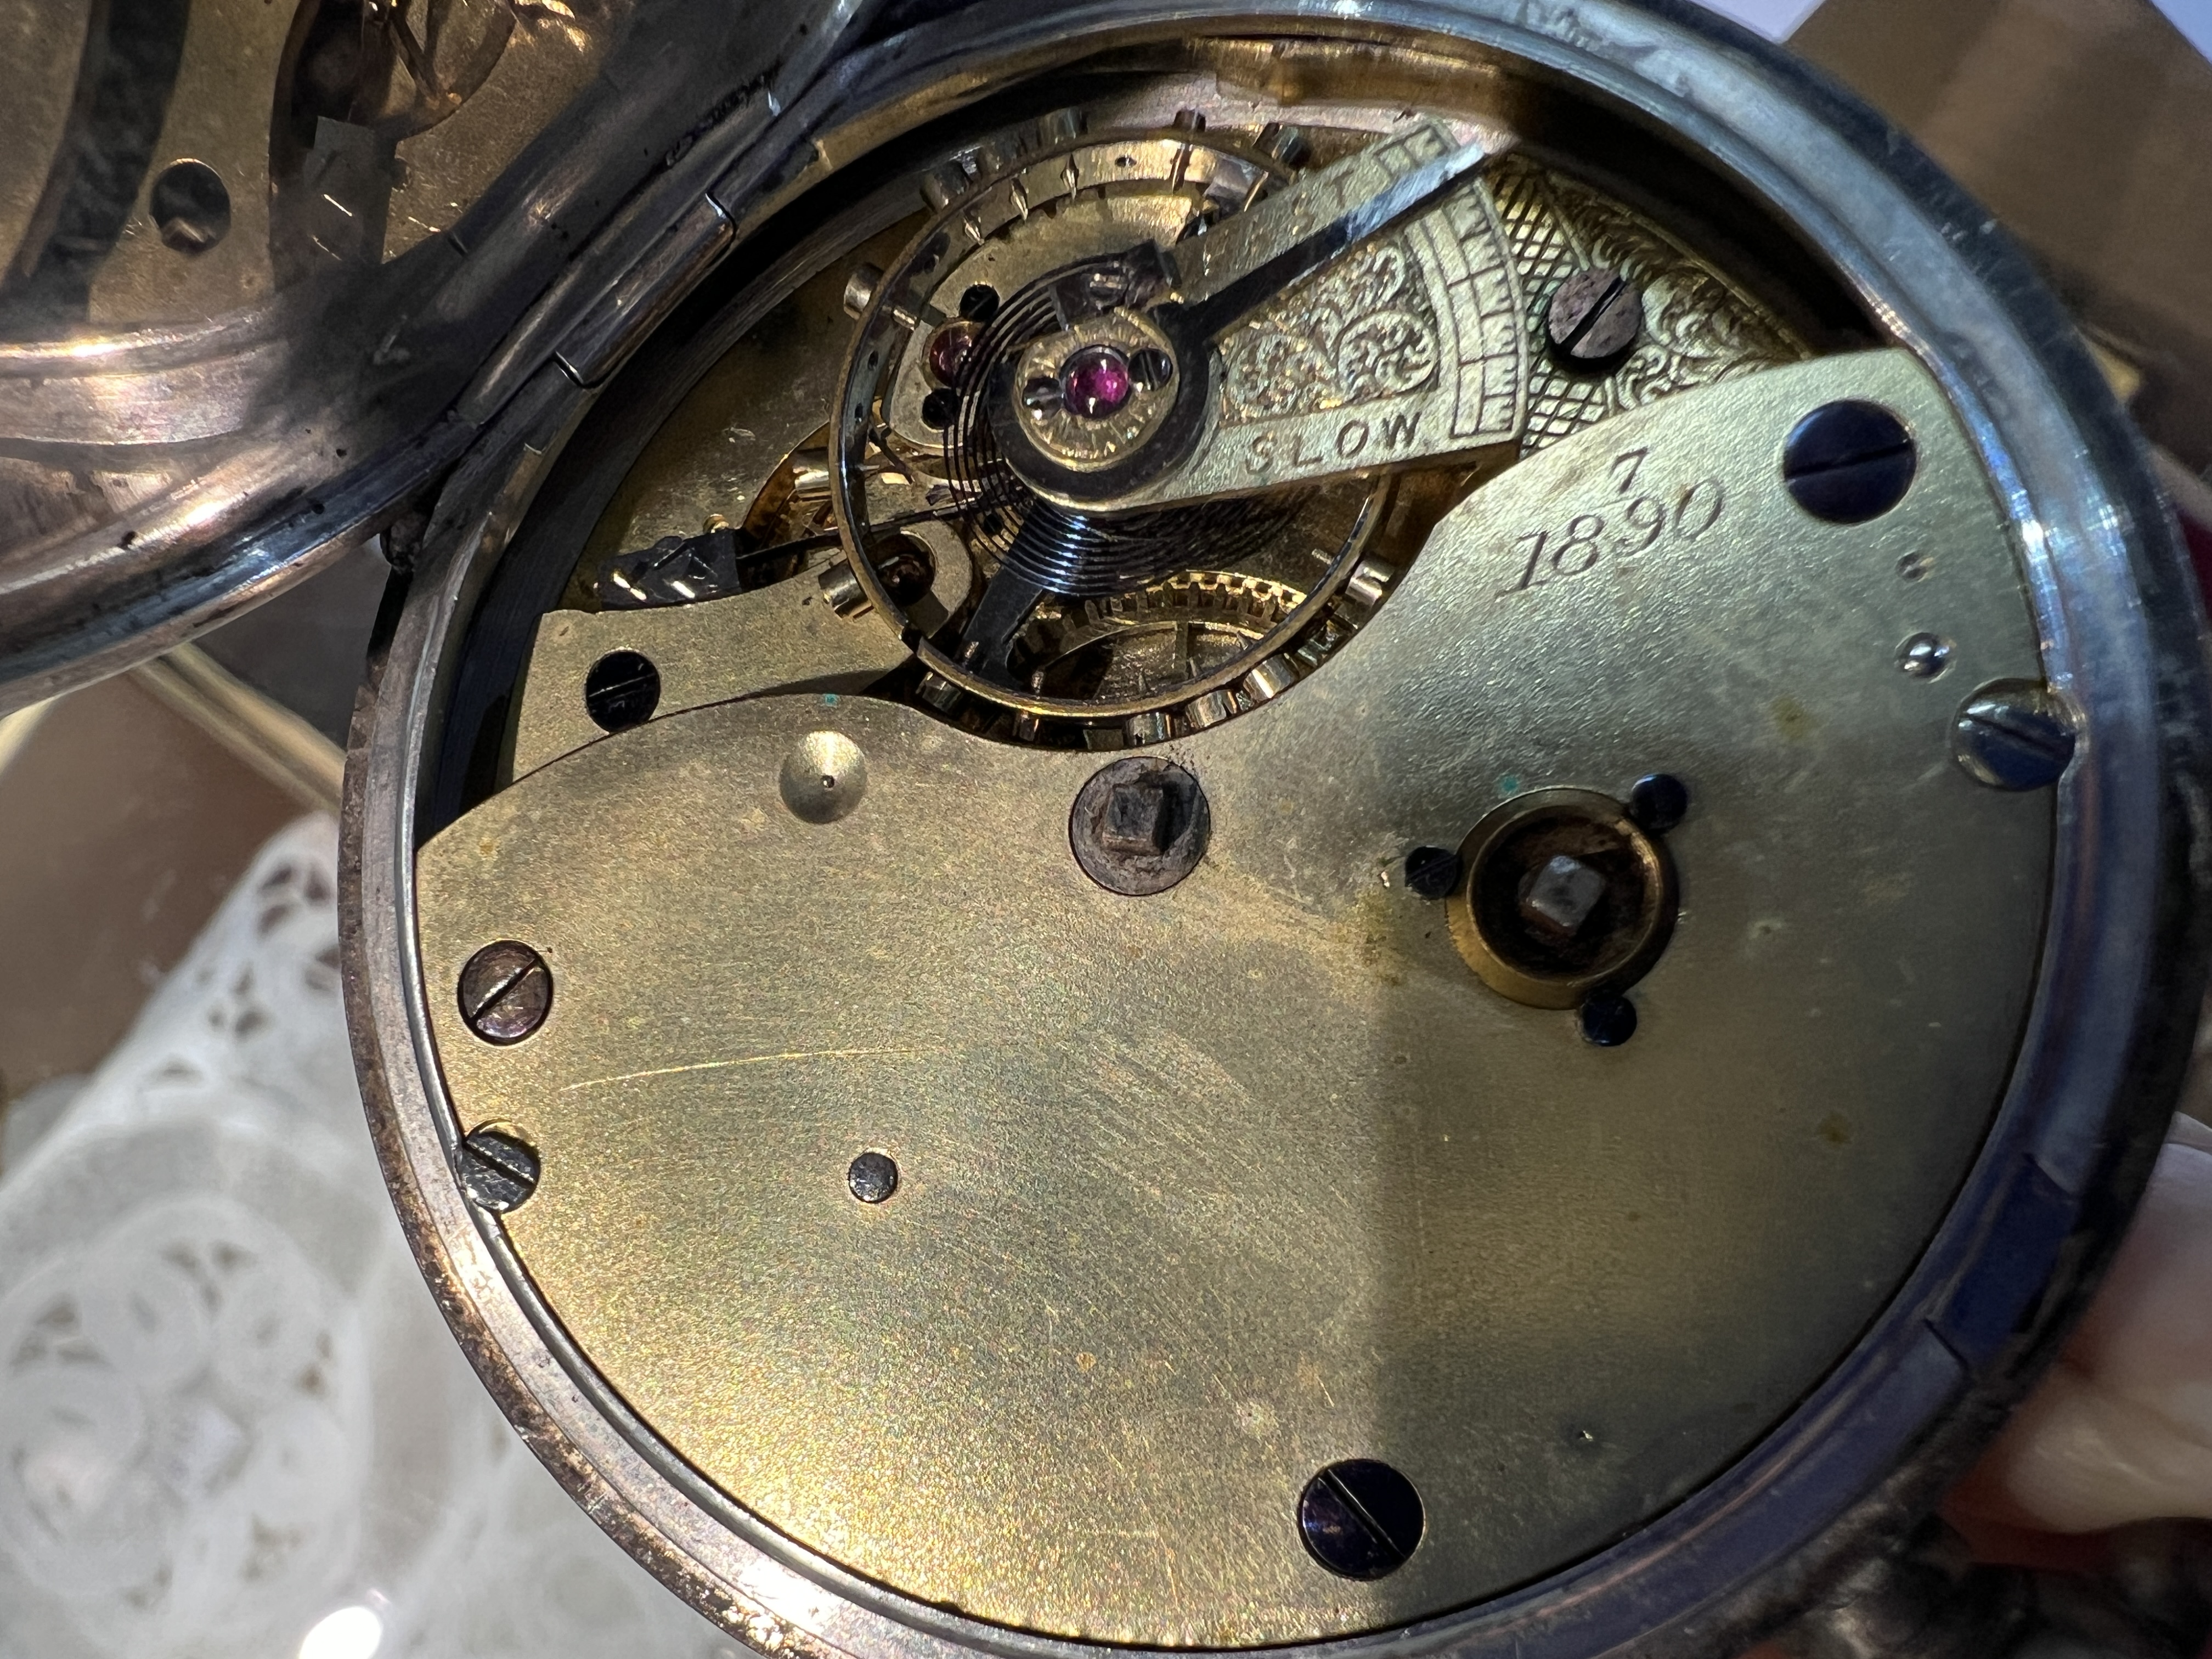 An open faced key wound gent's silver cased chronometer / pocket watch by Sam Wooton, London - Image 5 of 5